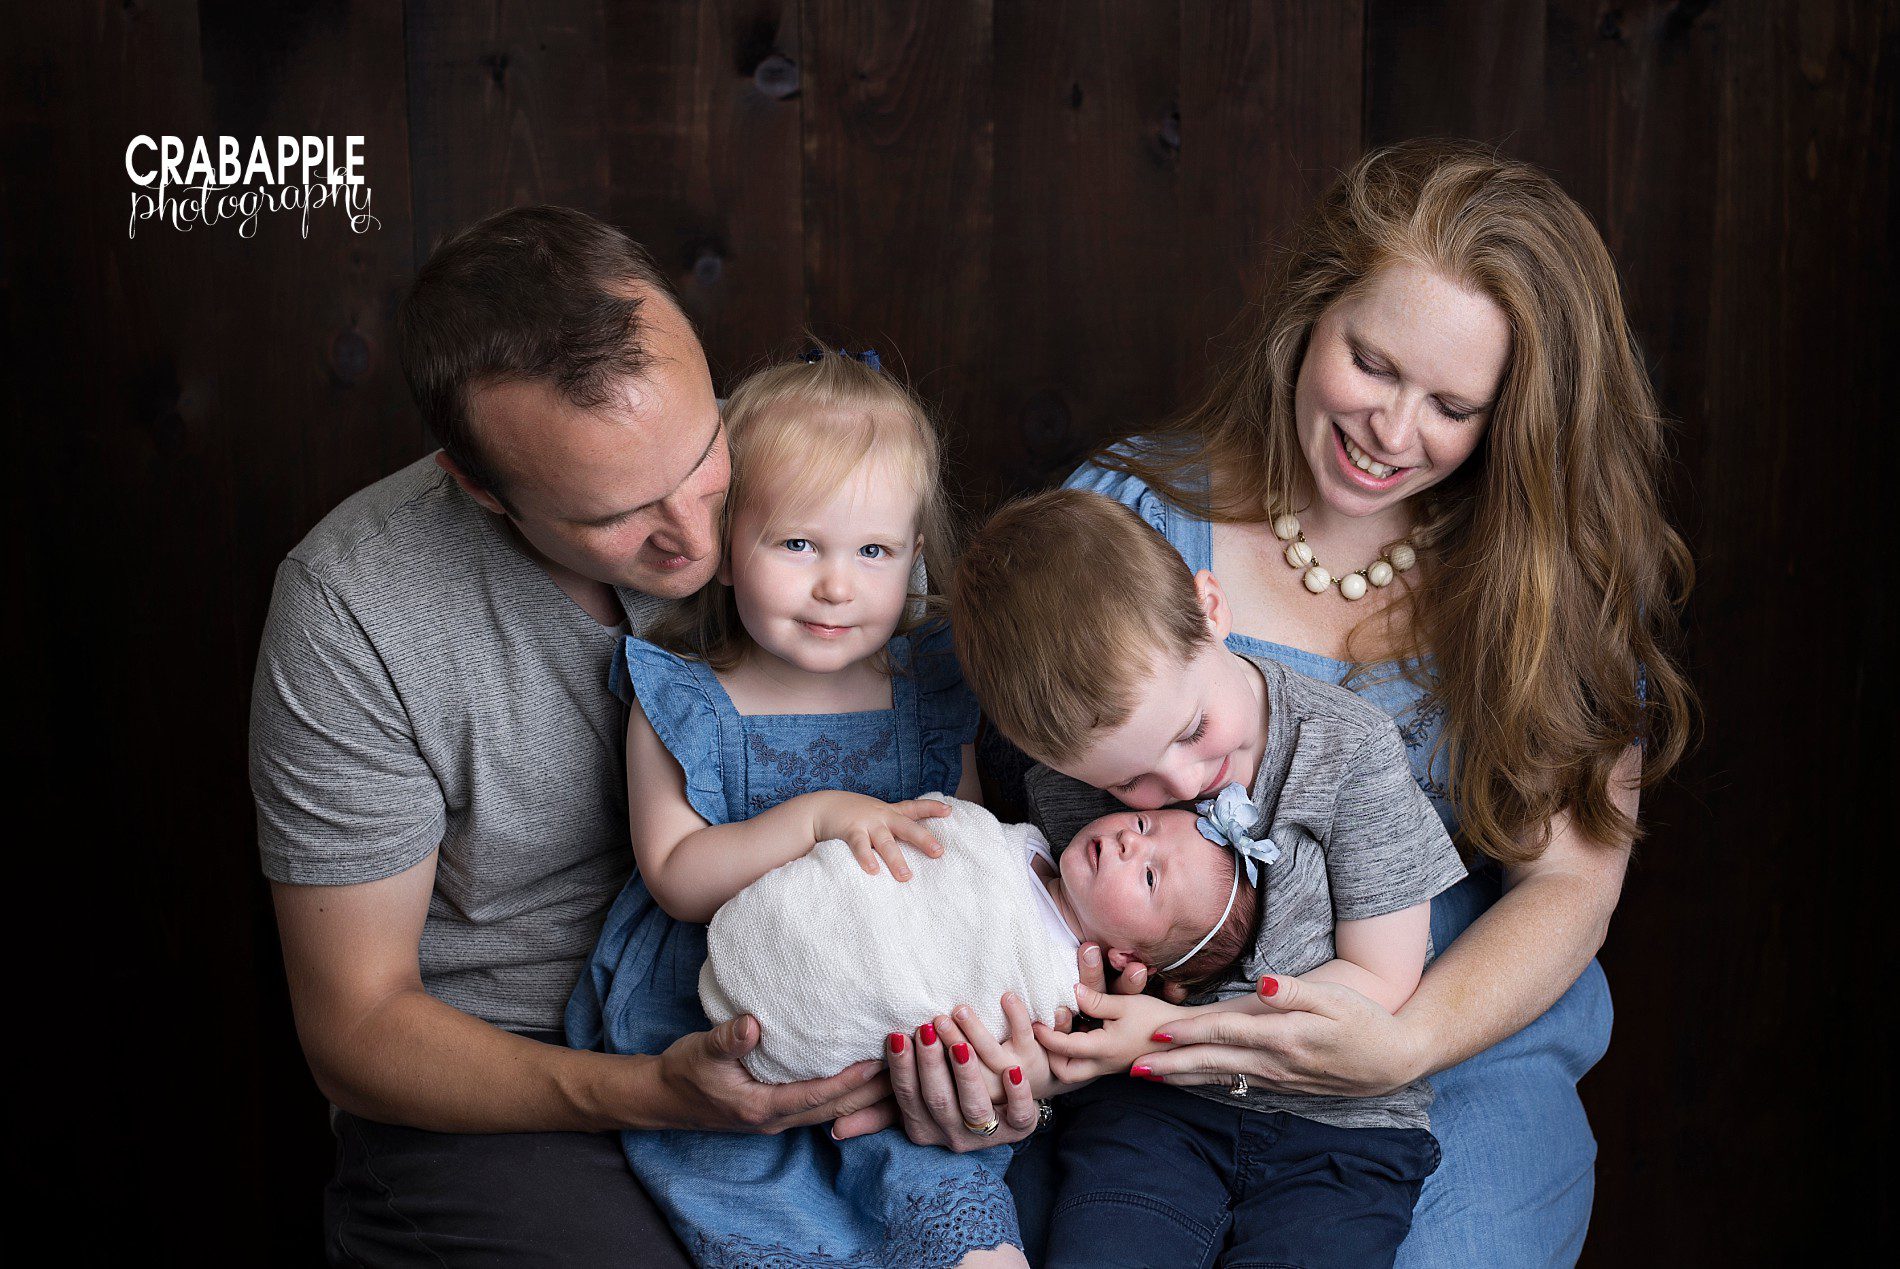 sweet family photos with newborn baby